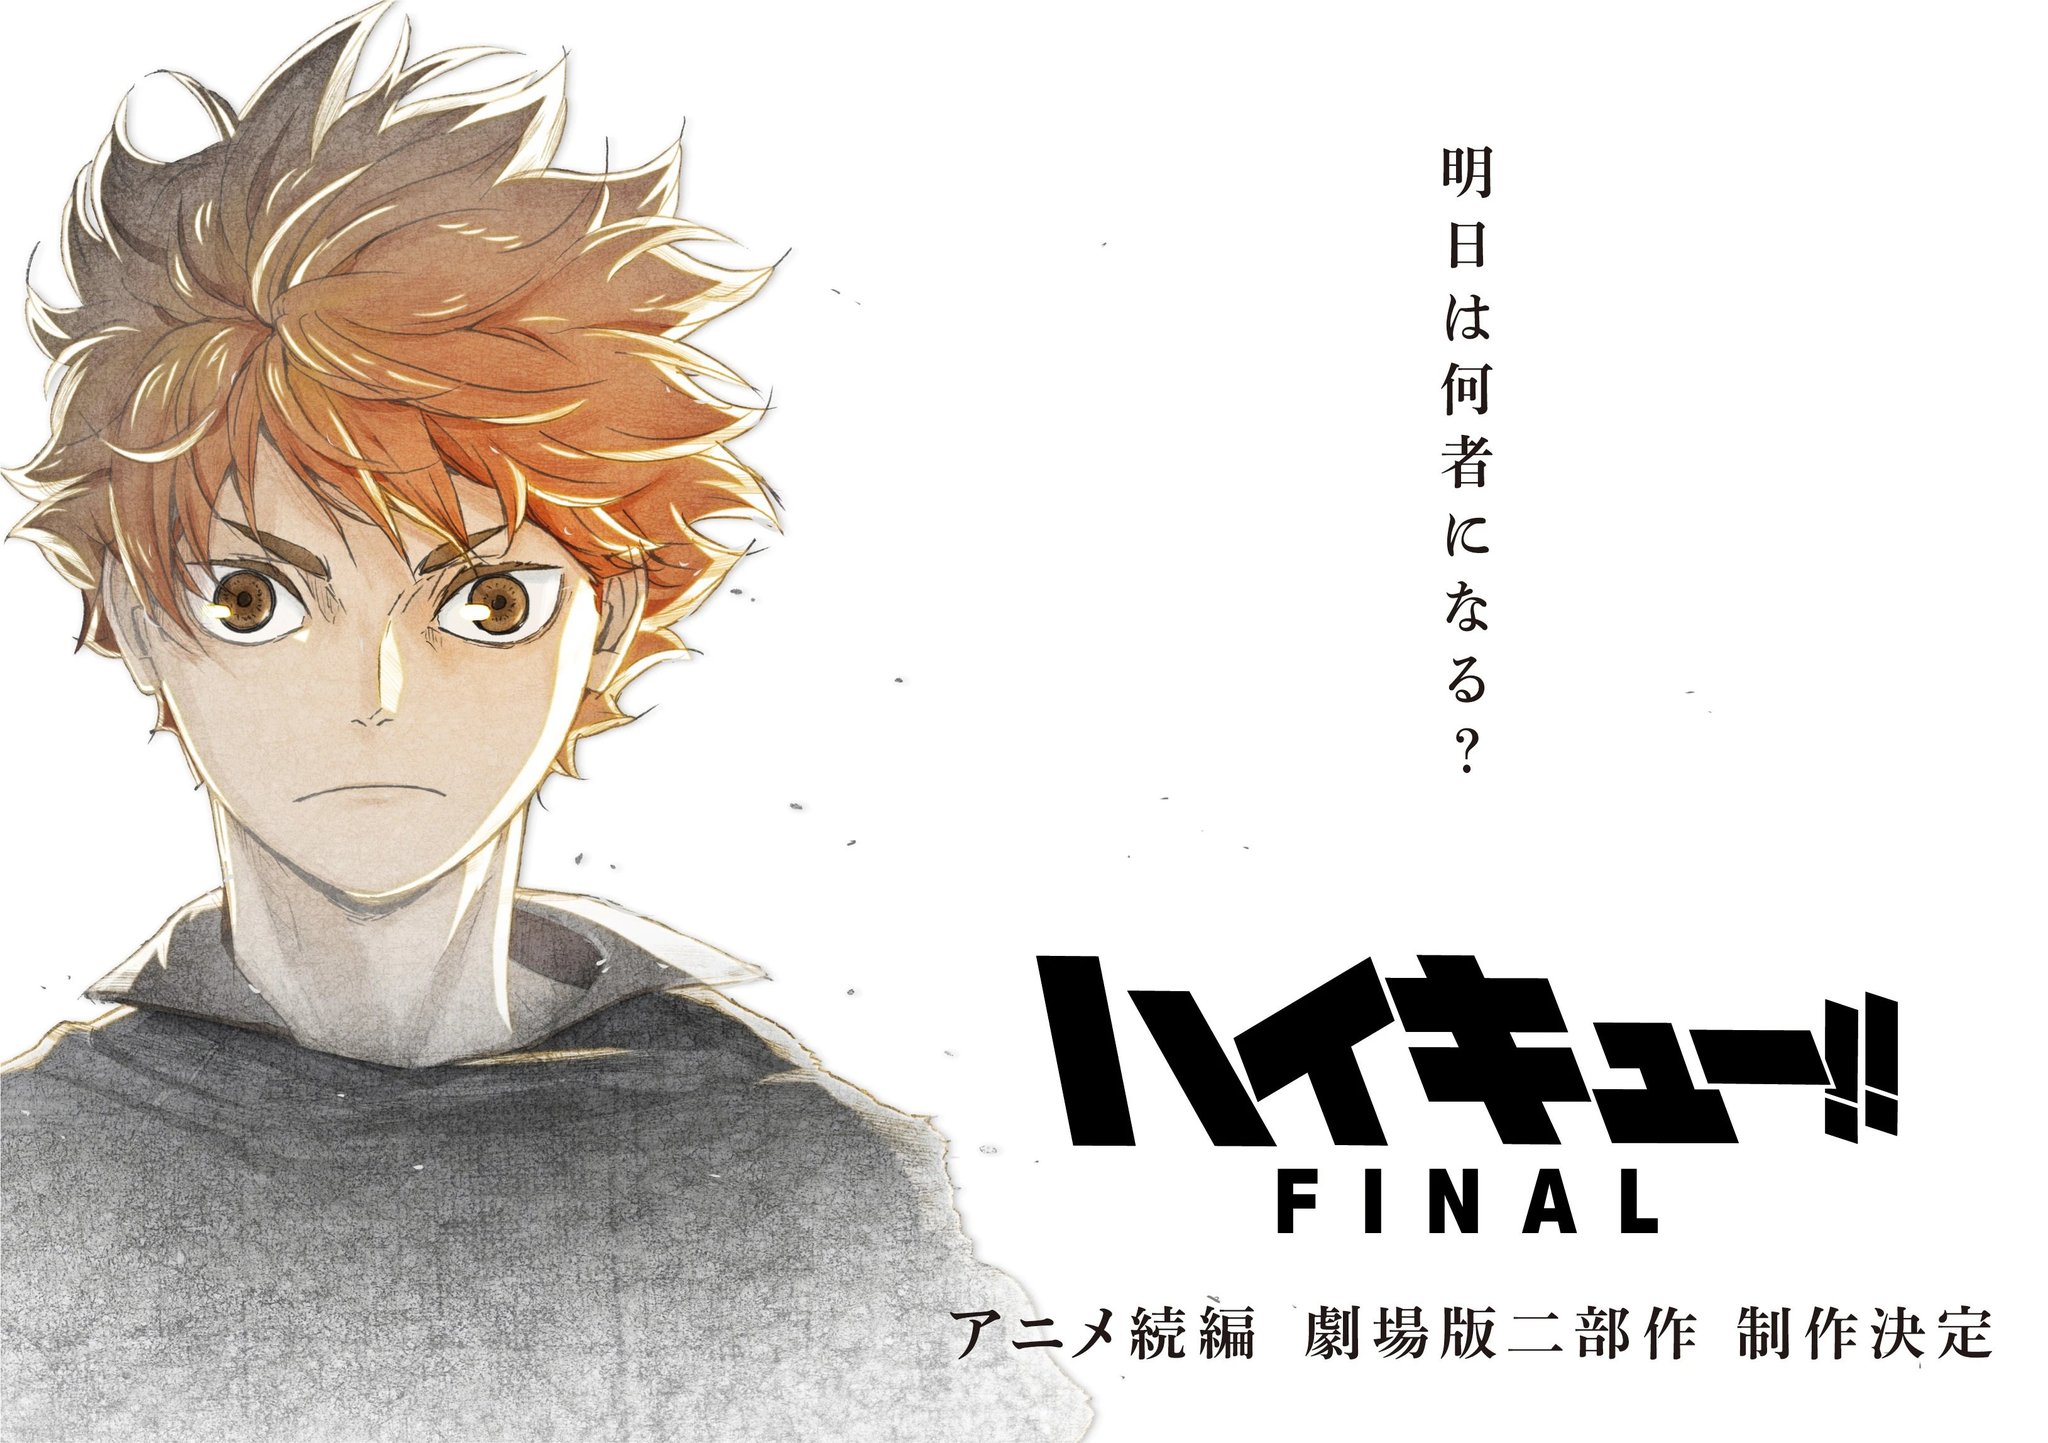 Haikyu!! FINAL Anime Movies will reveal New Information on June